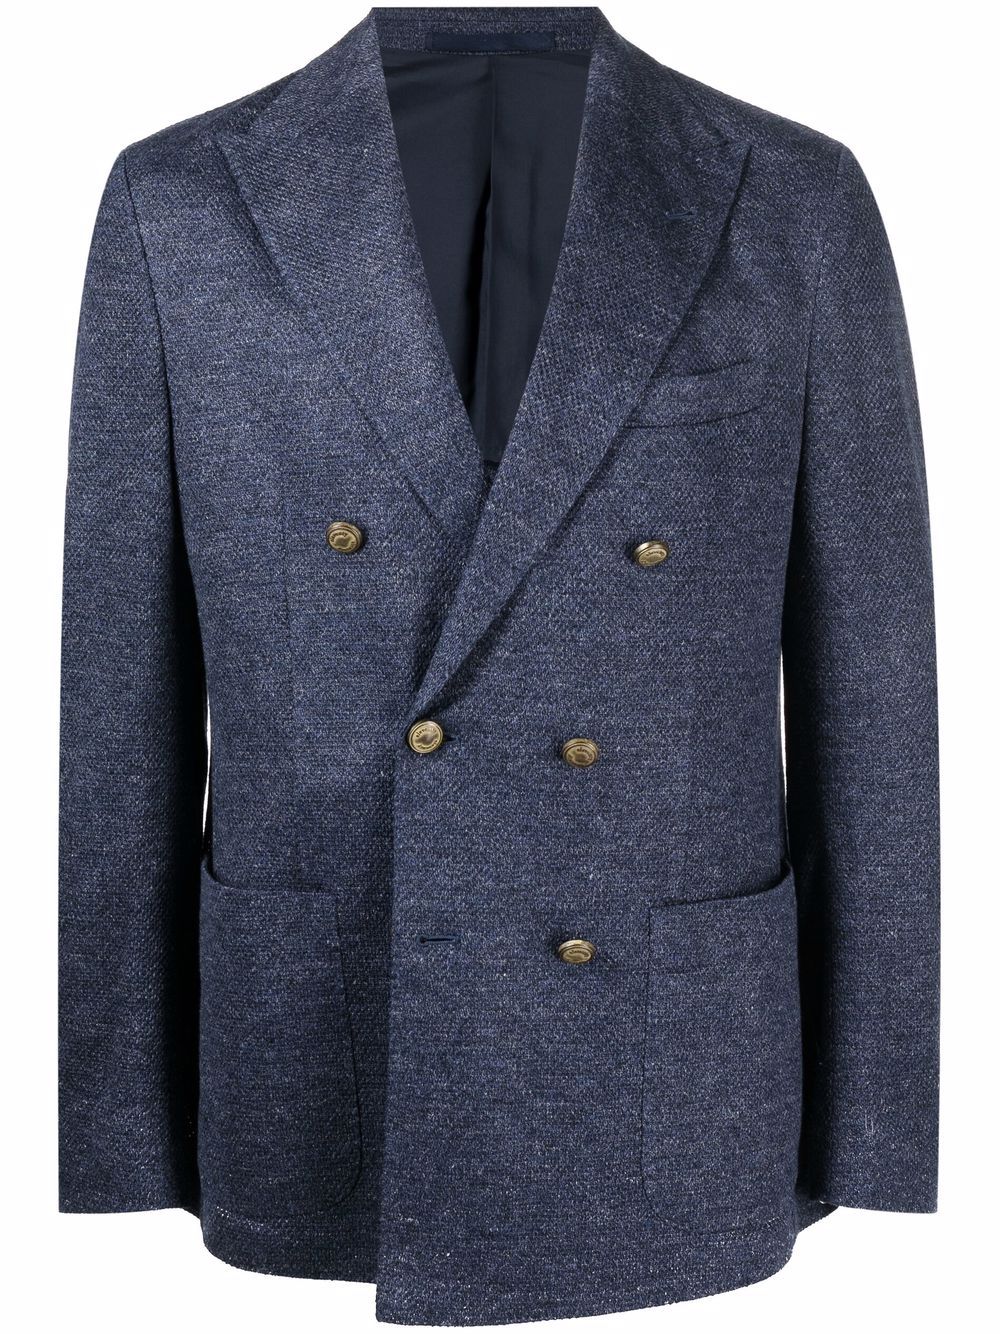 Shop Eleventy double-breasted linen jacket with Express Delivery - FARFETCH